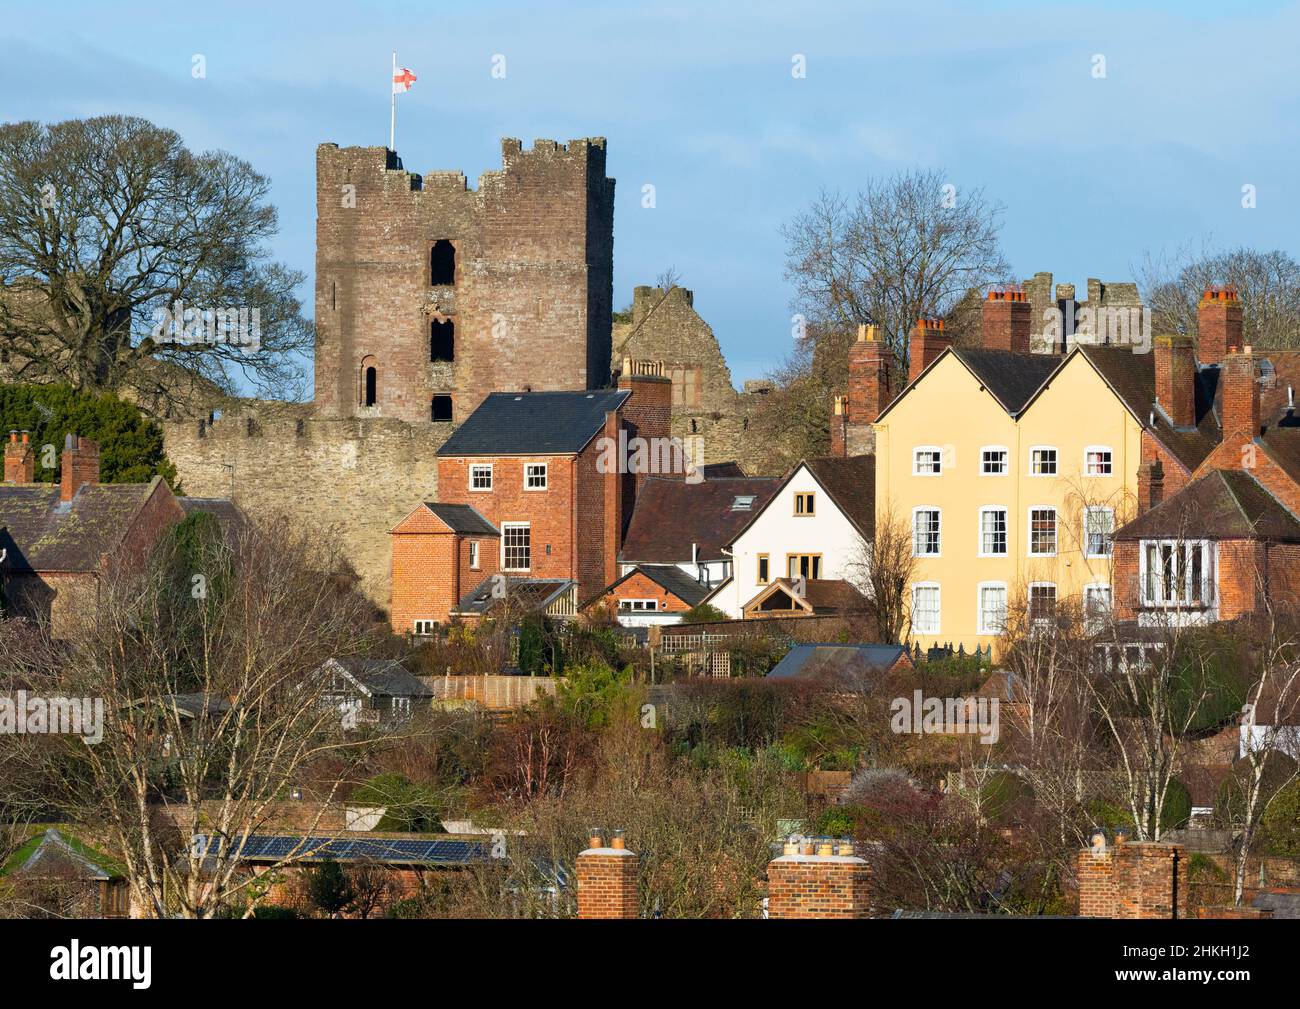 The great tower of Ludlow Castle rising above houses in the town of Ludlow, Shropshire. Stock Photo